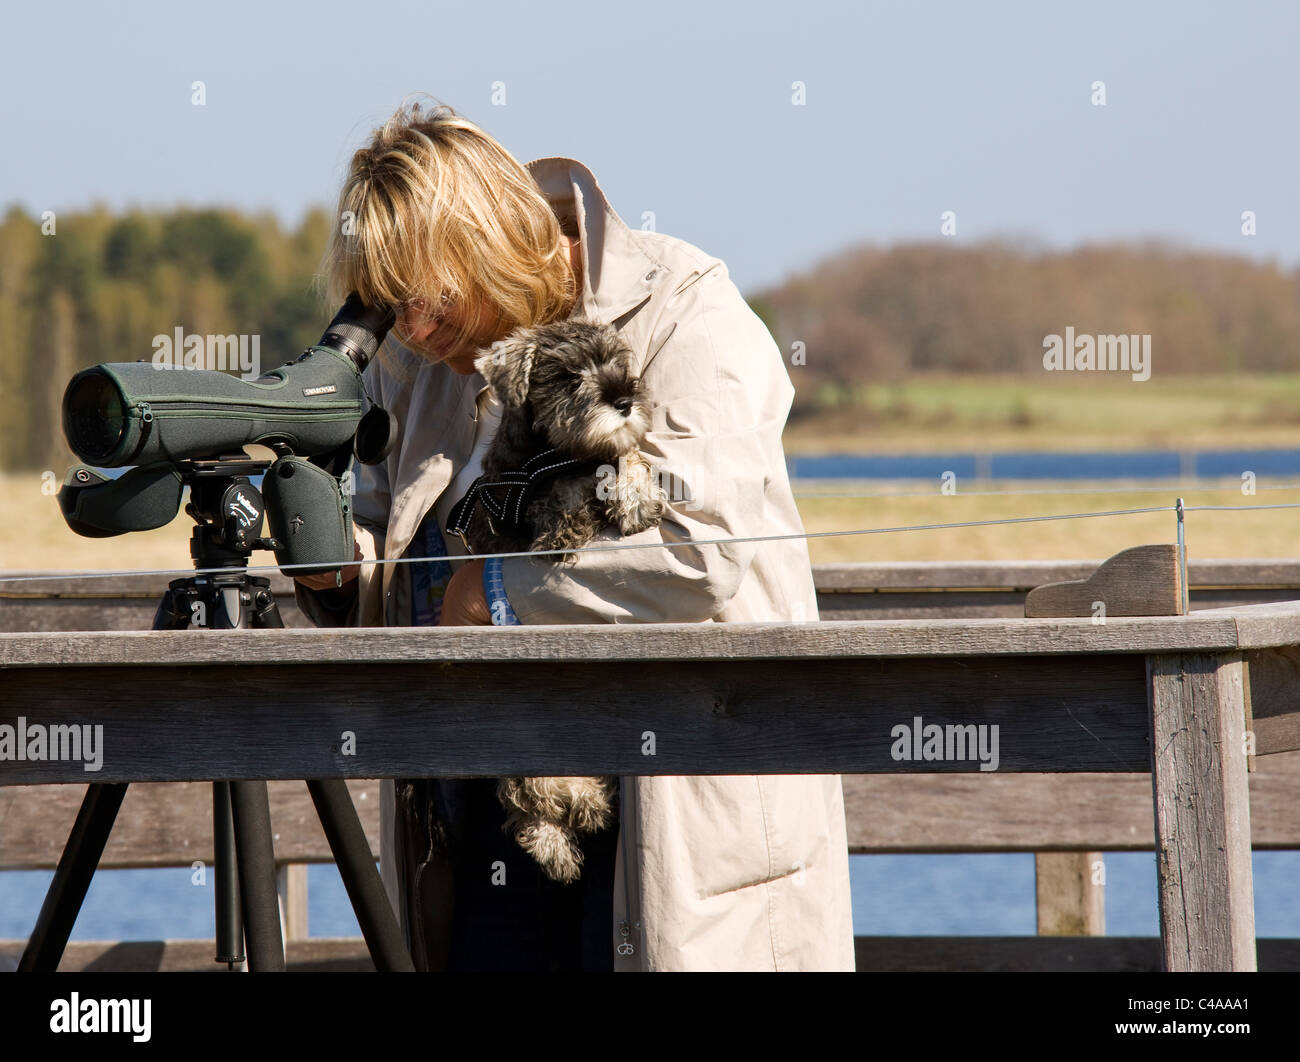 Birdwatcher looking down telescope while holding dog at a nature reserve. Stock Photo